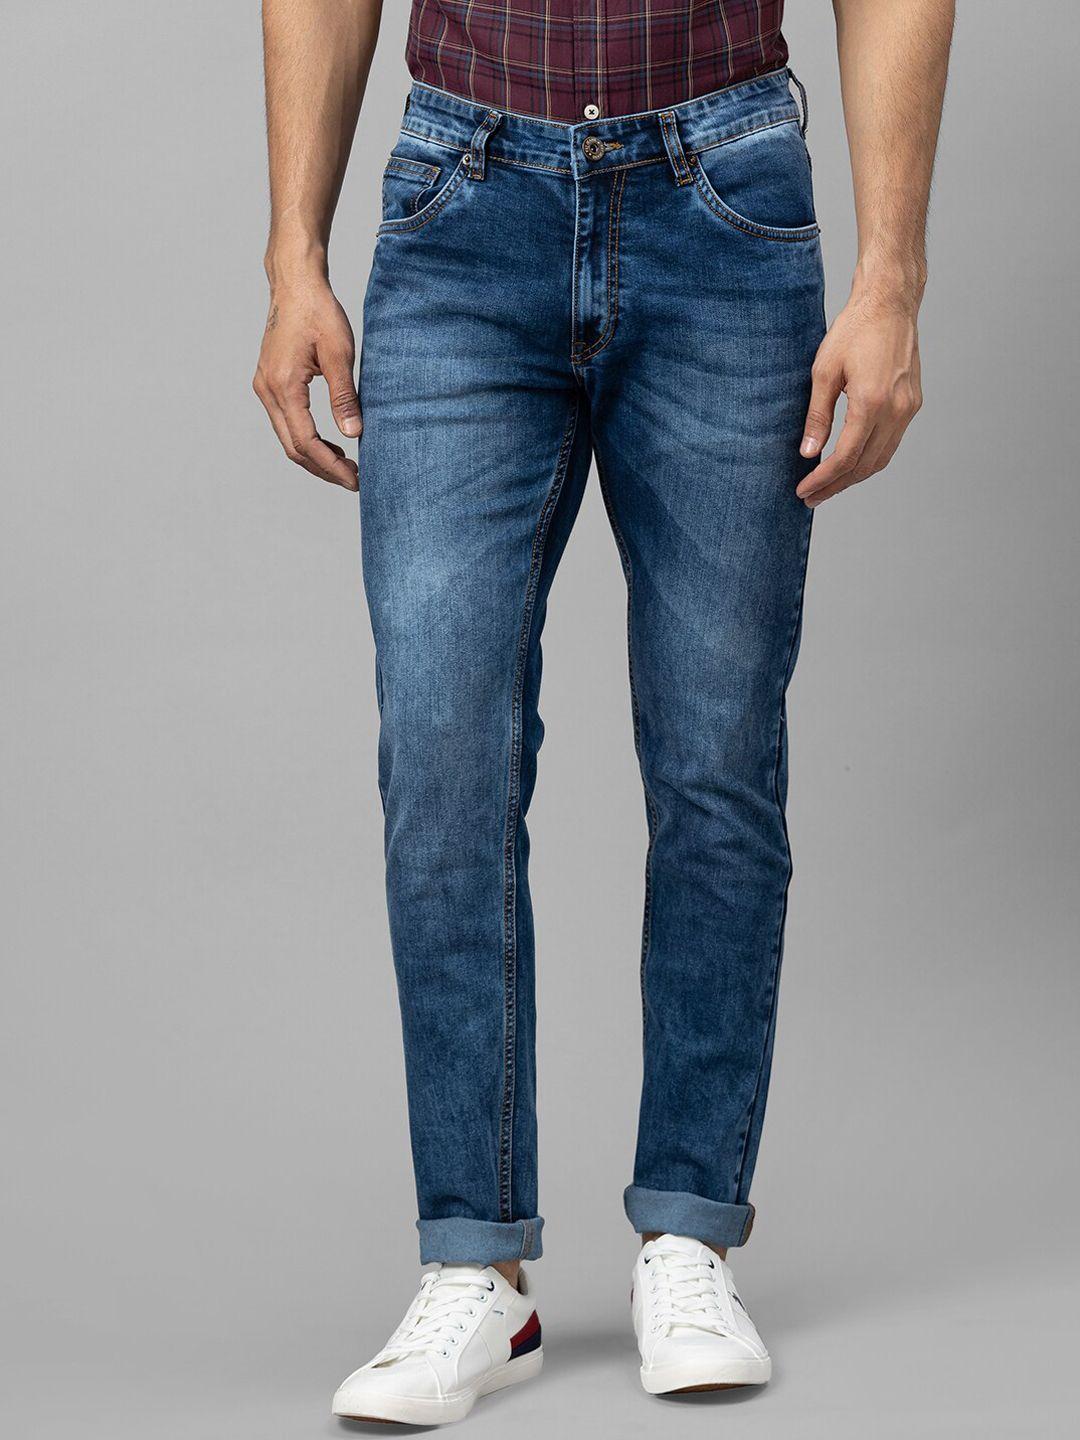 globus-men-blue-tapered-fit-light-fade-stretchable-cotton-jeans